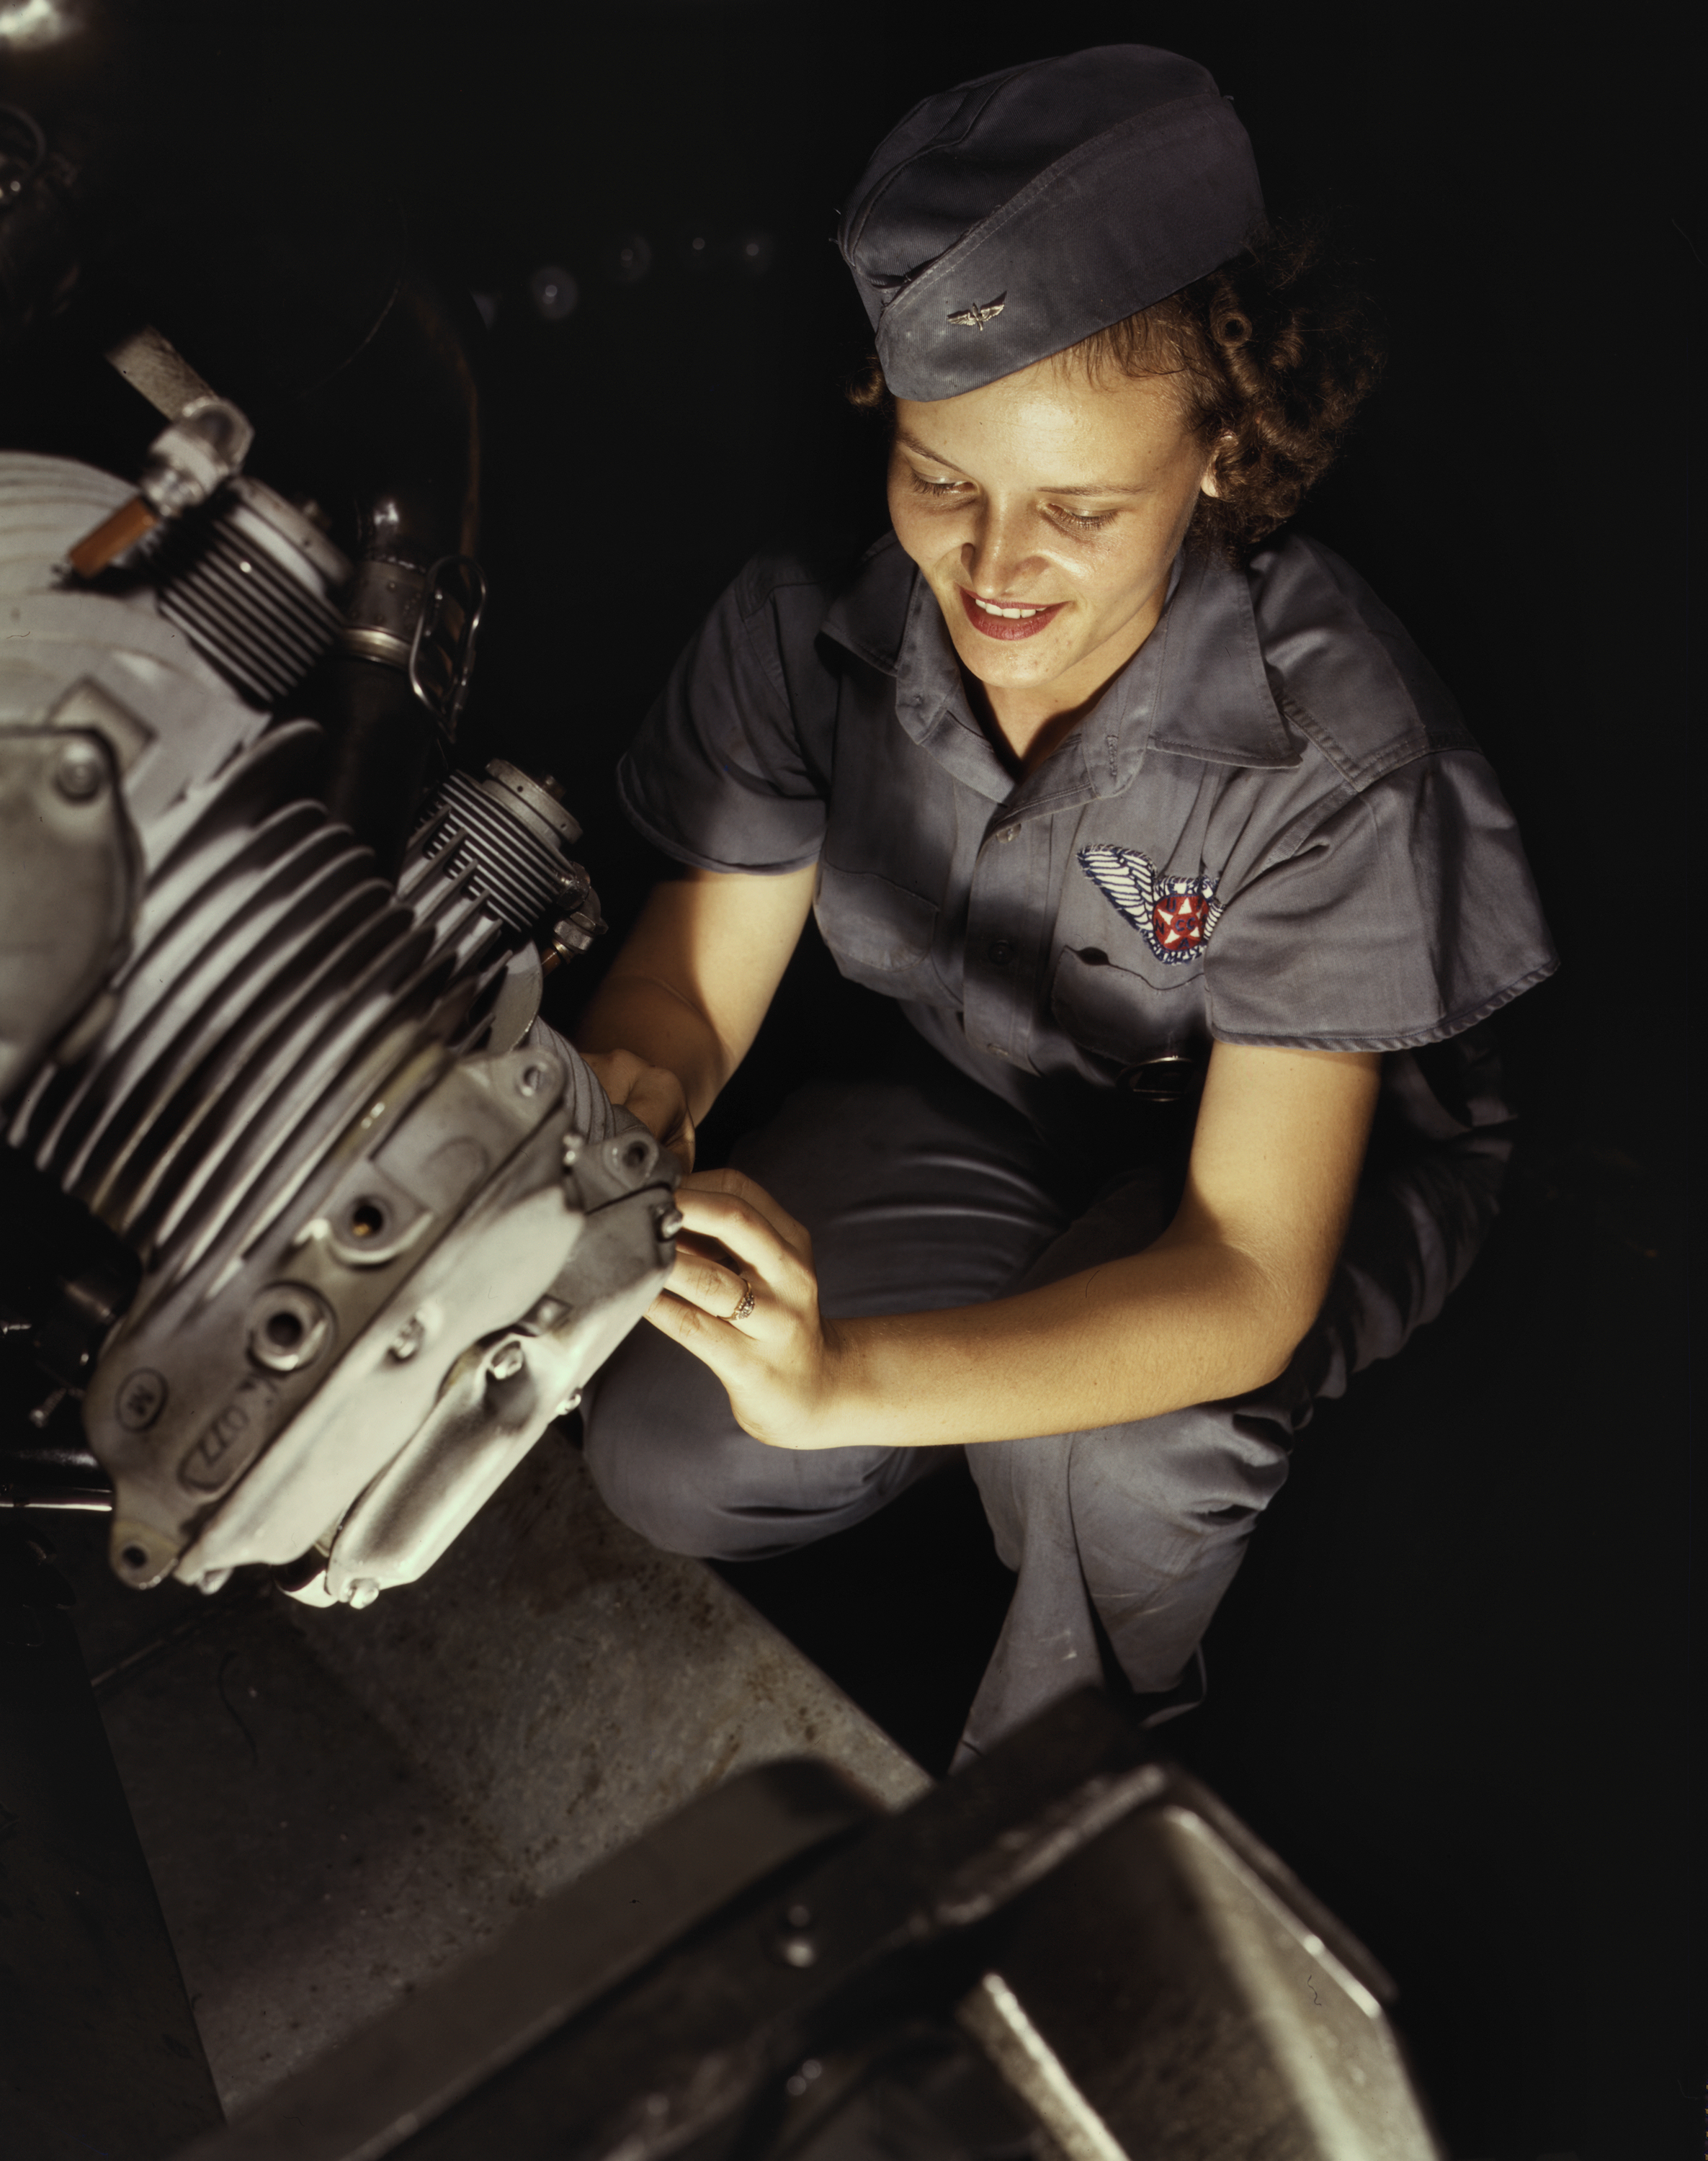 Woman Mechanic Works on a Wright Whirlwind Motor